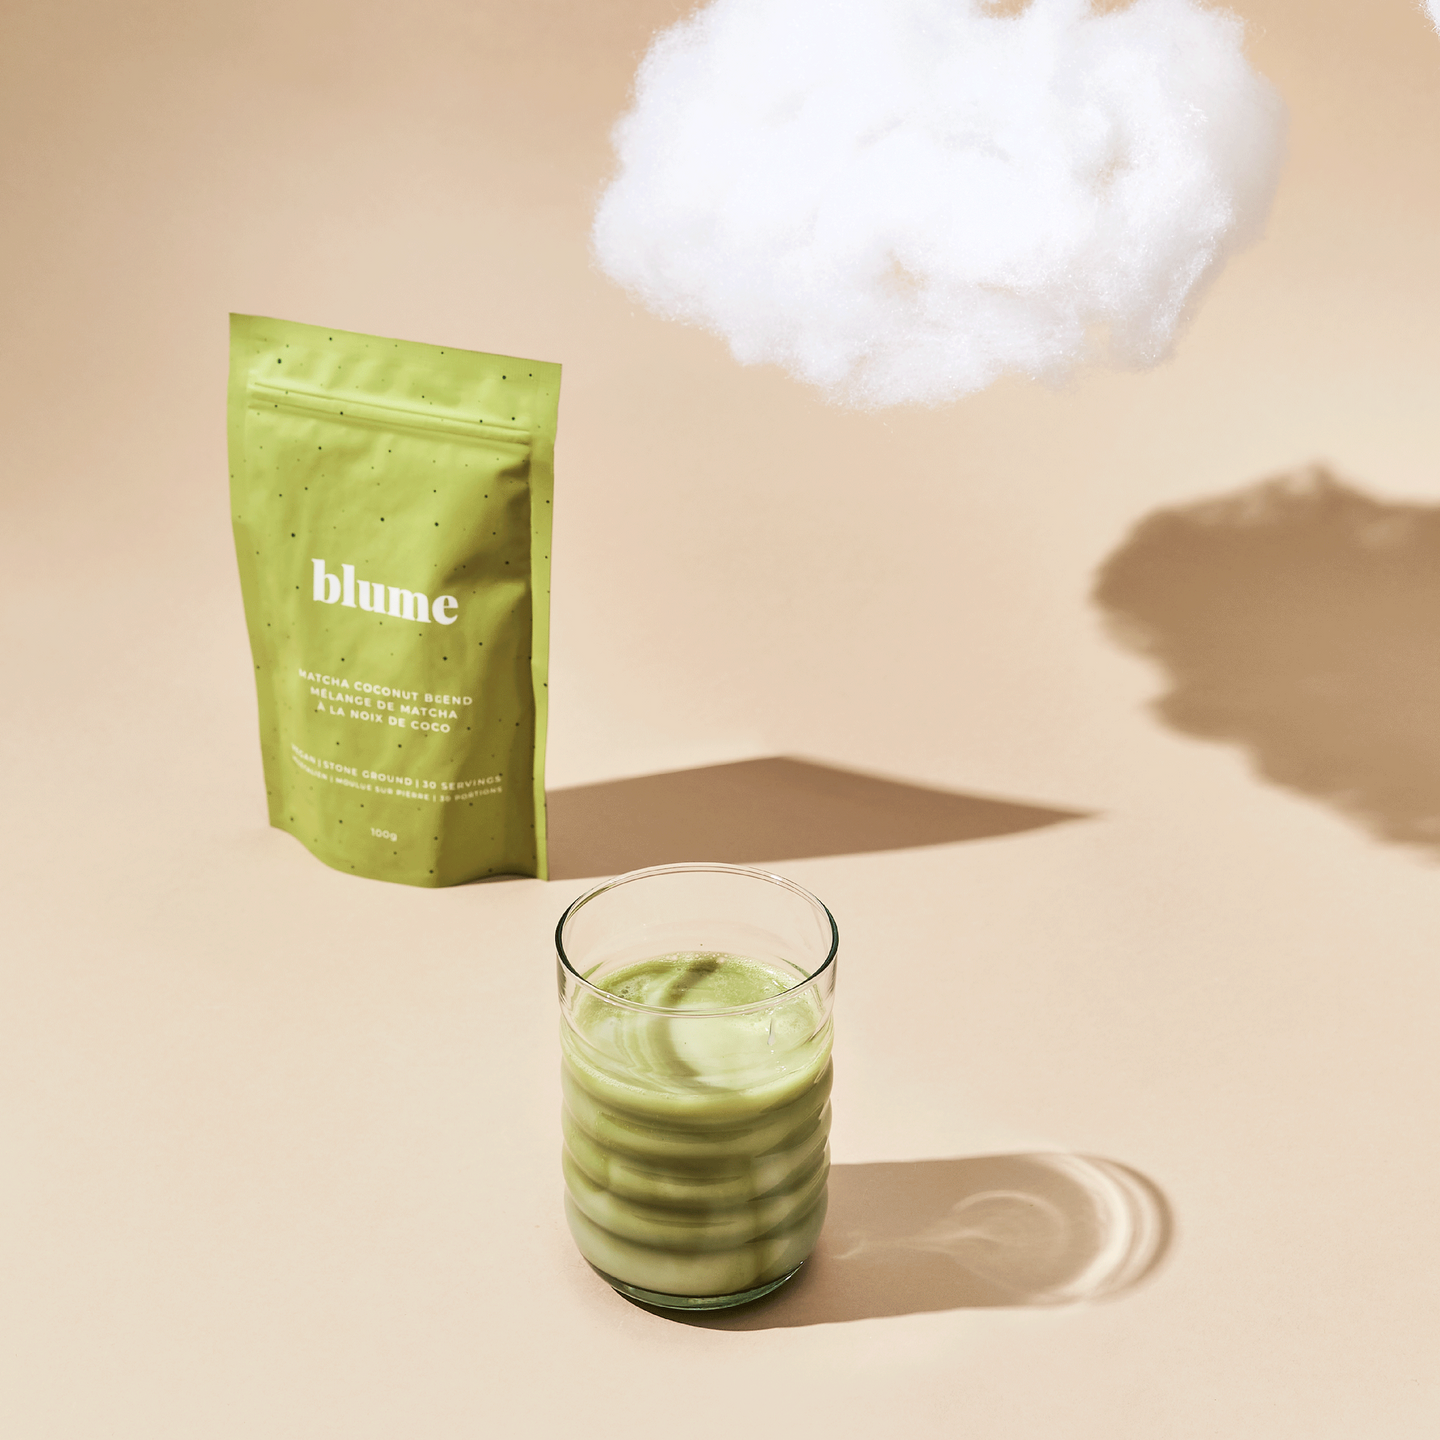 A glass of matcha latte made with Blume Matcha Coconut Blend on a beige background with a cloud